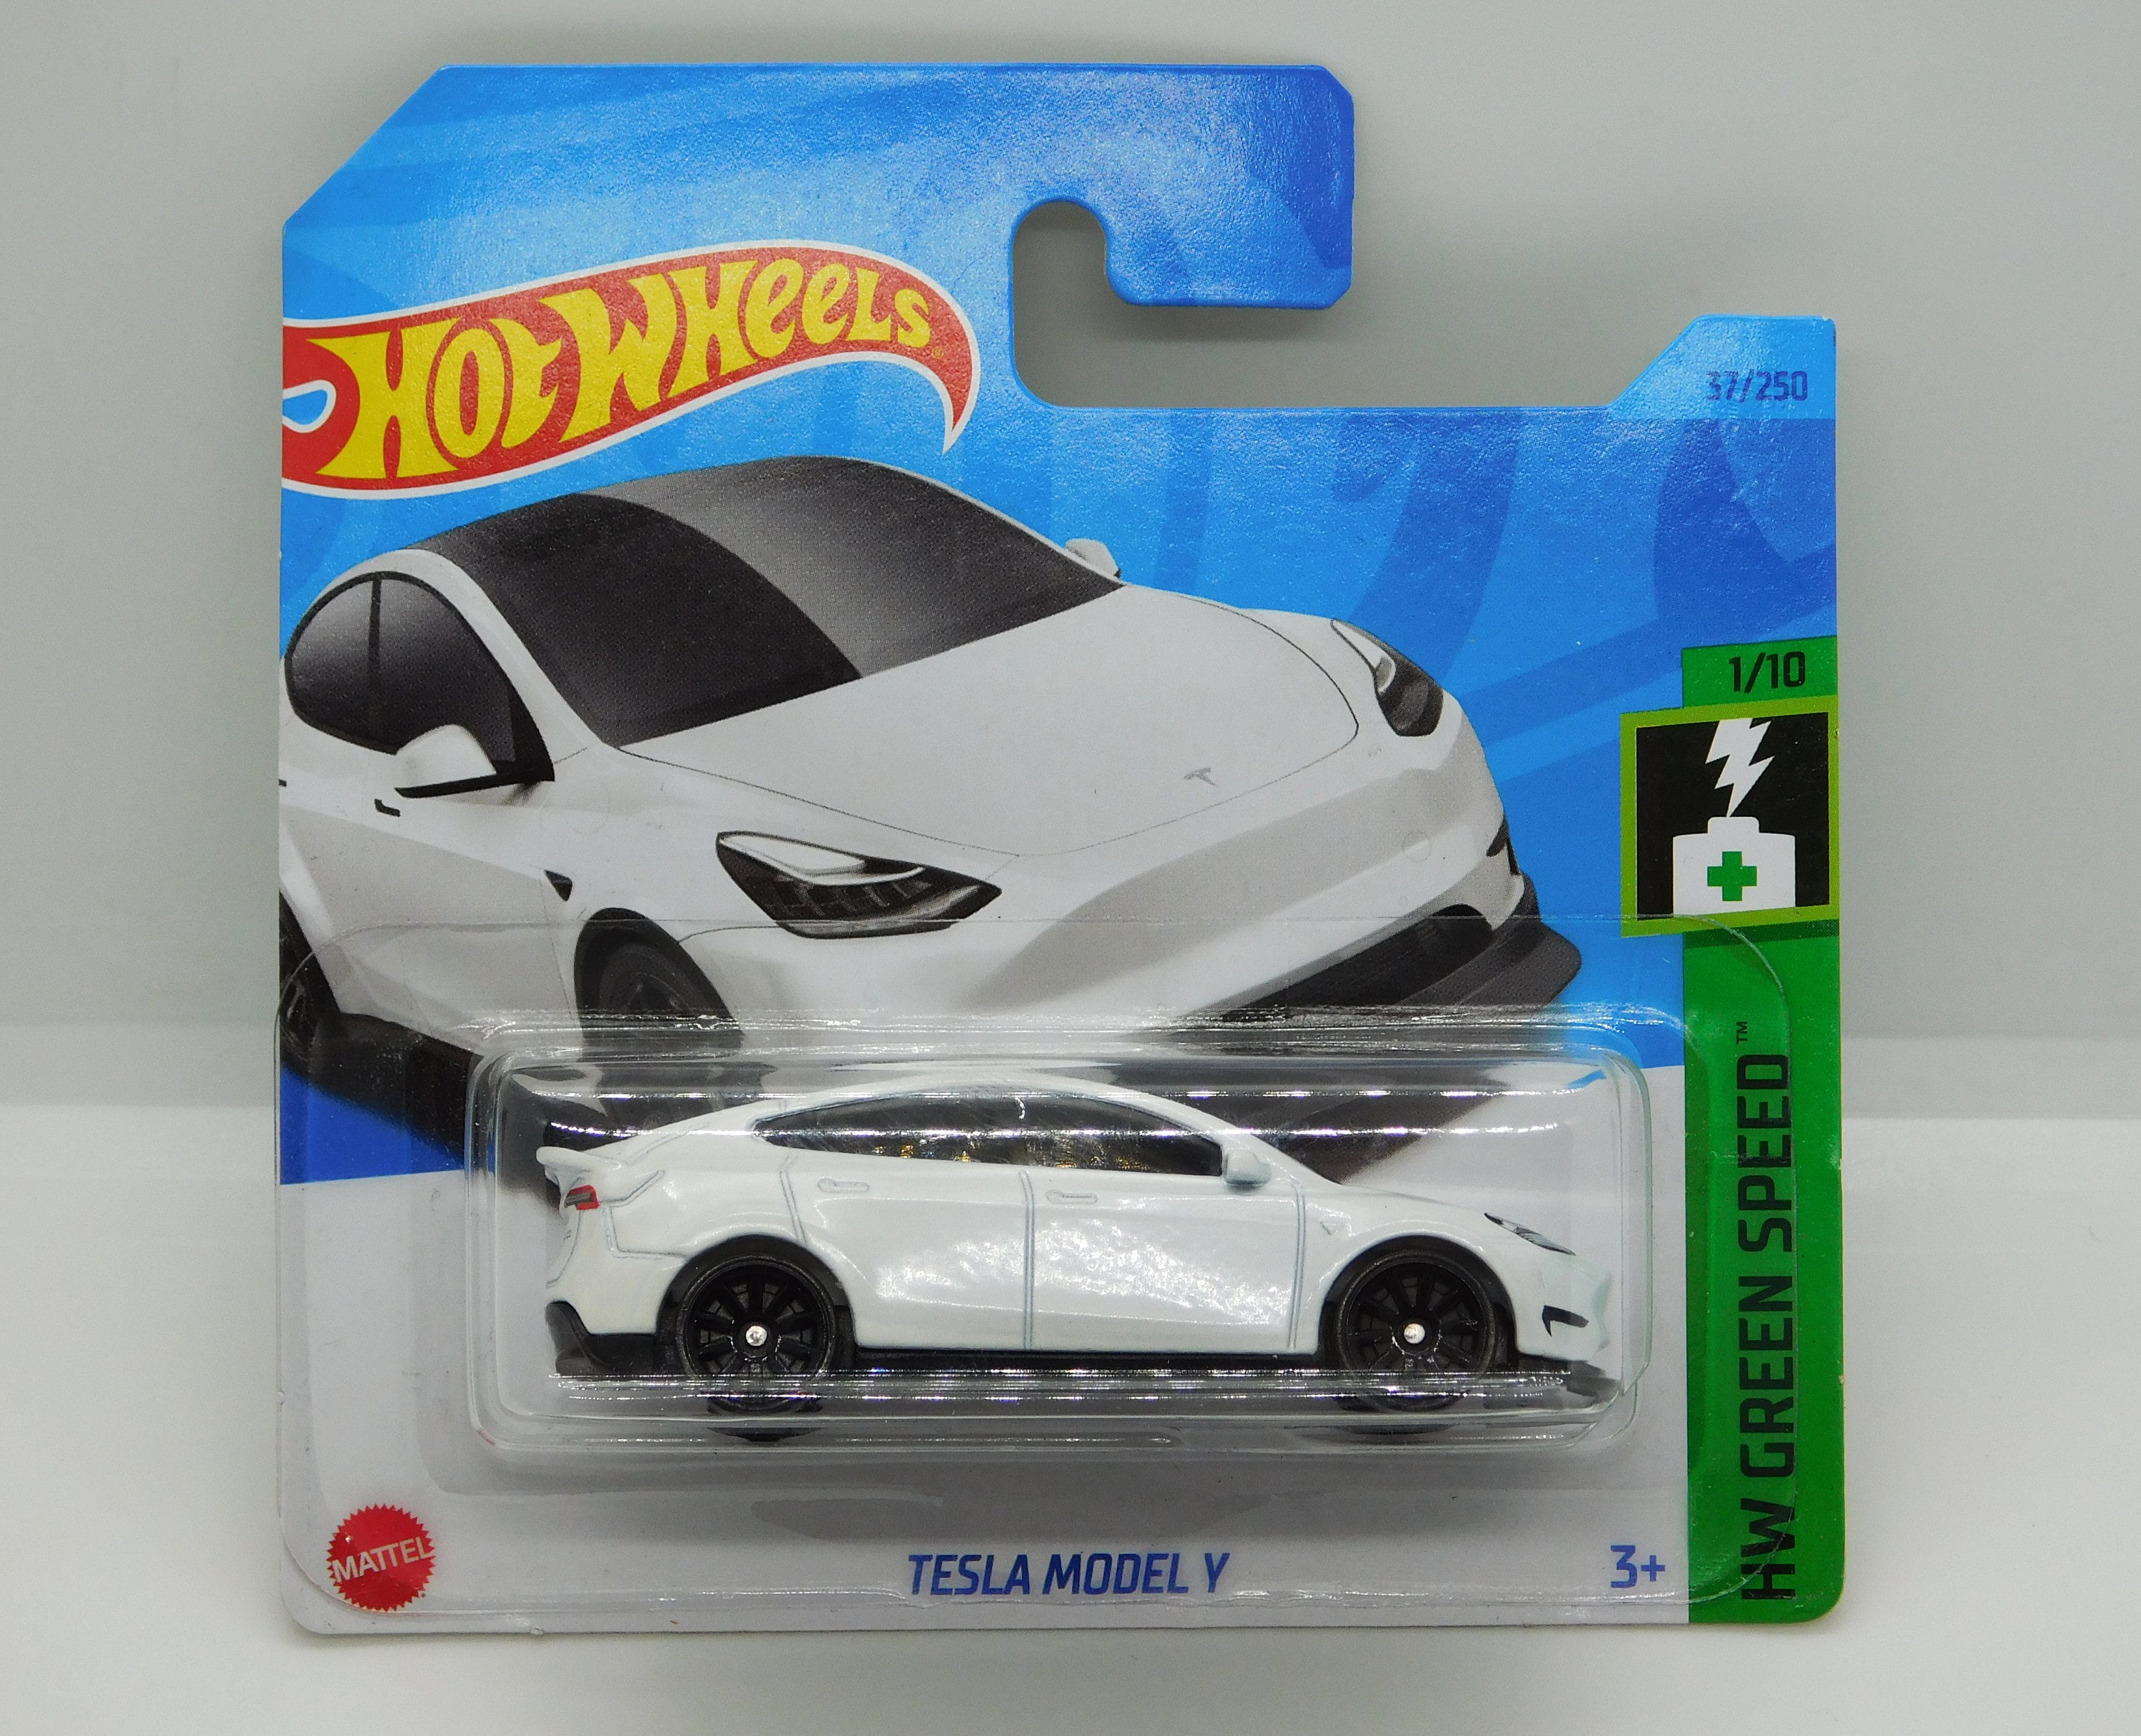 Hot Wheels Tesla Model Y White Rare Miniature Collectible Model ,Geschenk  ..WORLDWIDE shipping with tracking number EVERY DAY